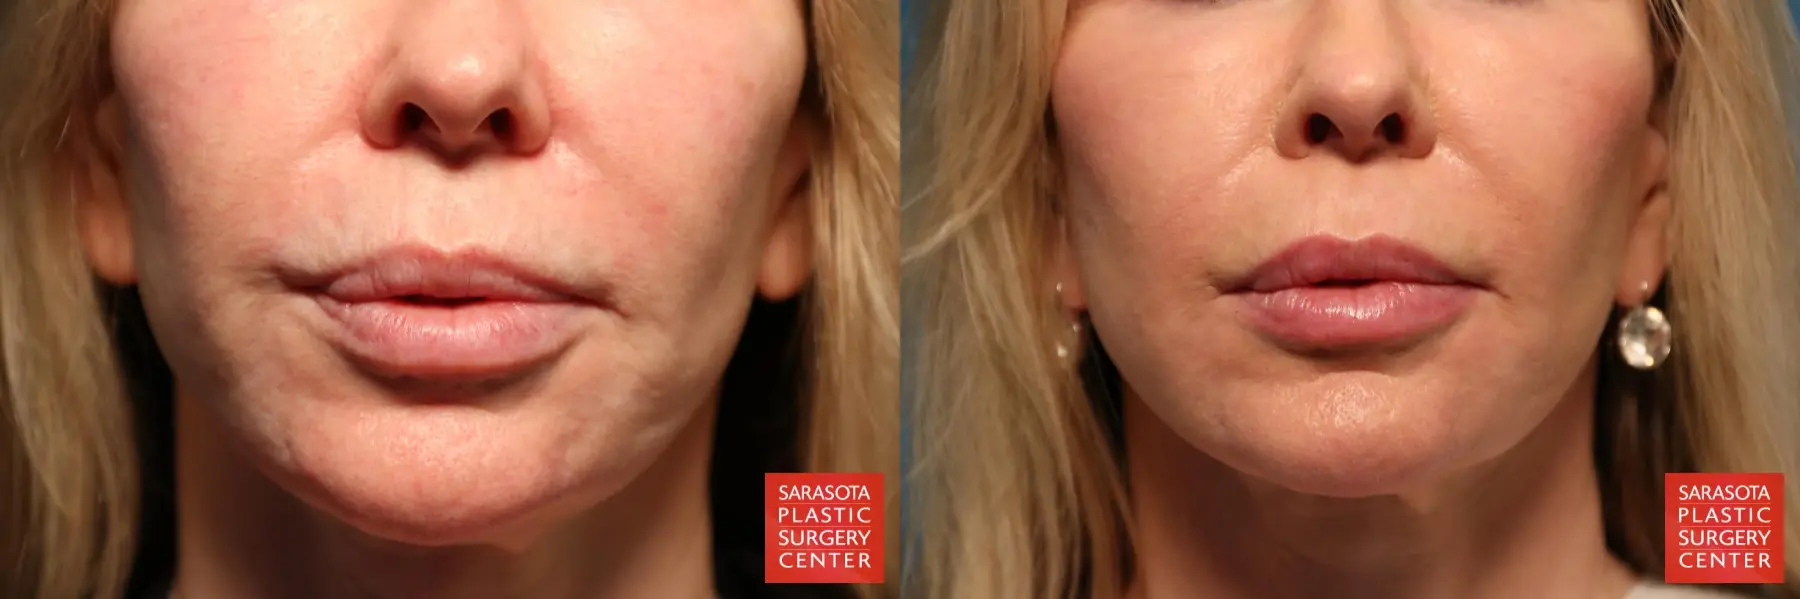 Laser Skin Resurfacing - Face: Patient 7 - Before and After 1